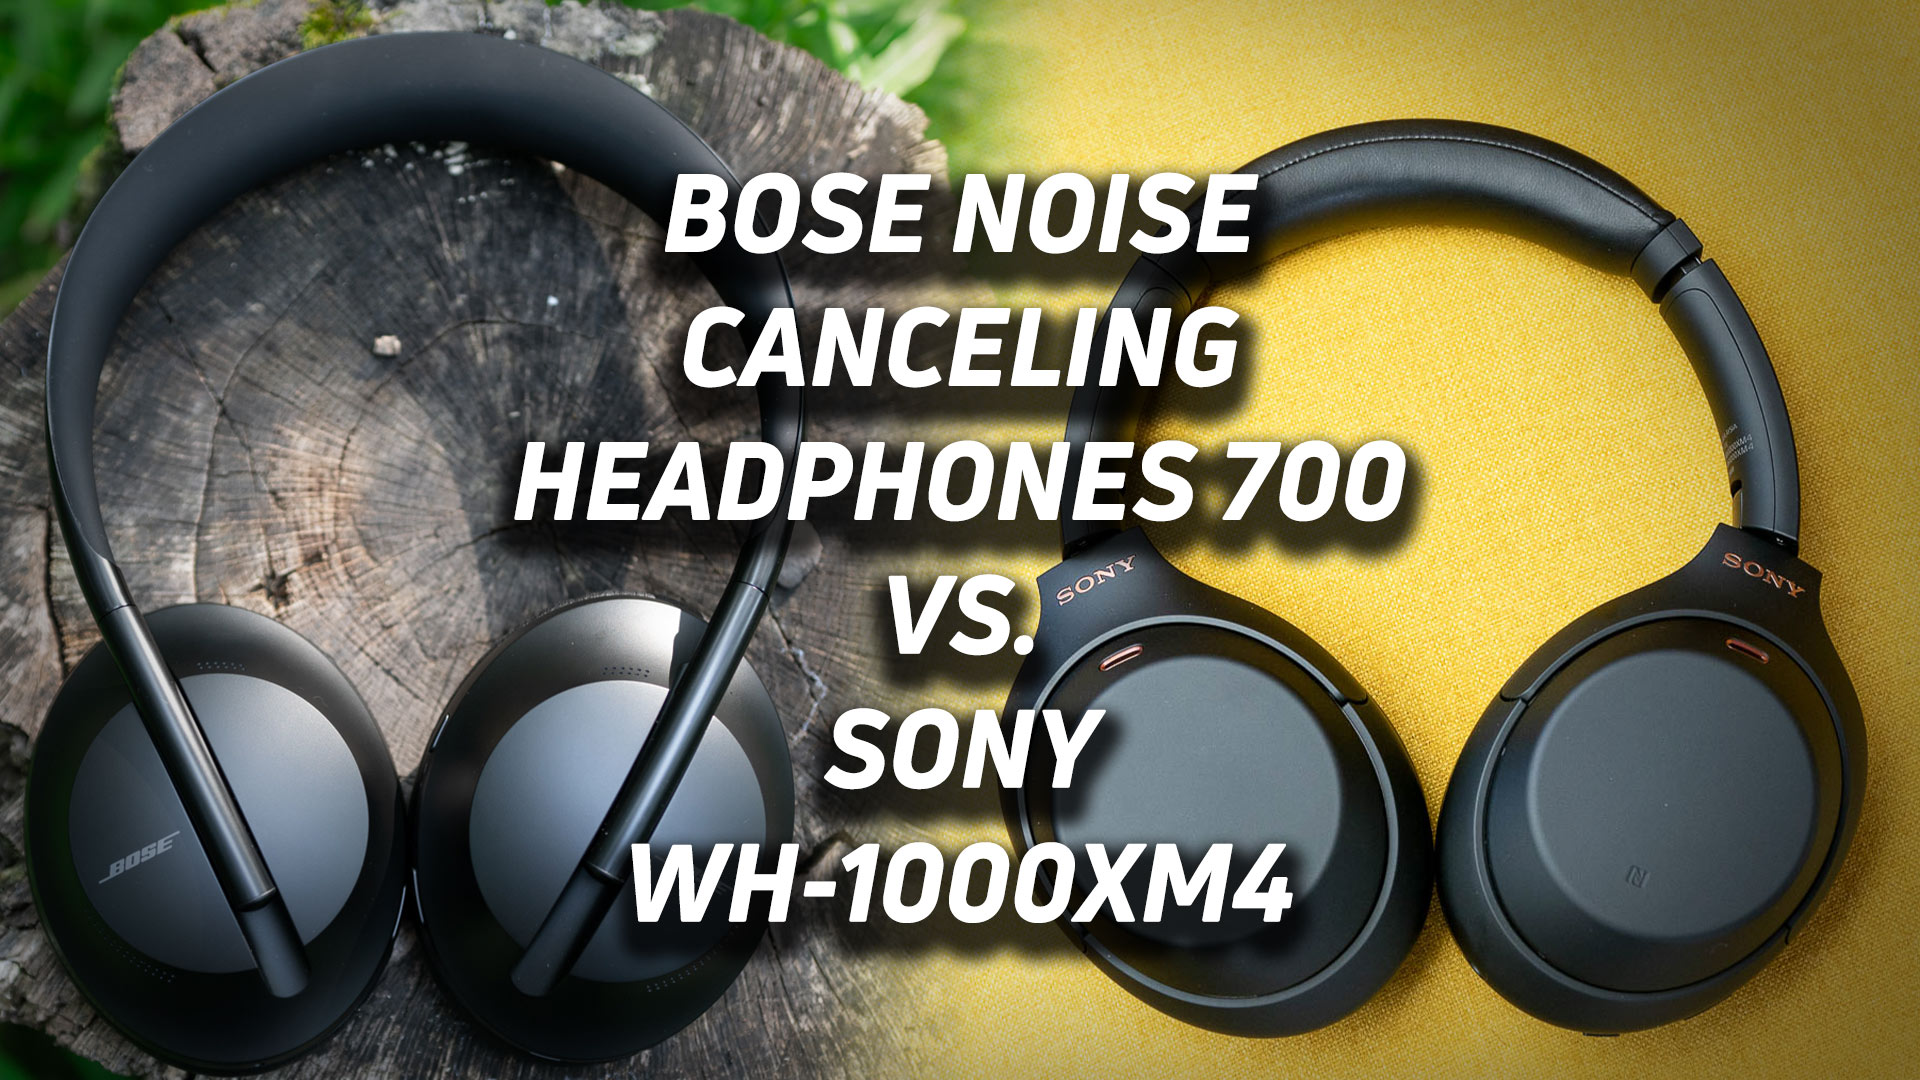 A blended image of the Bose Noise Canceling Headphones 700 vs Sony WH-1000XM4 with the respective text overlaid atop it.